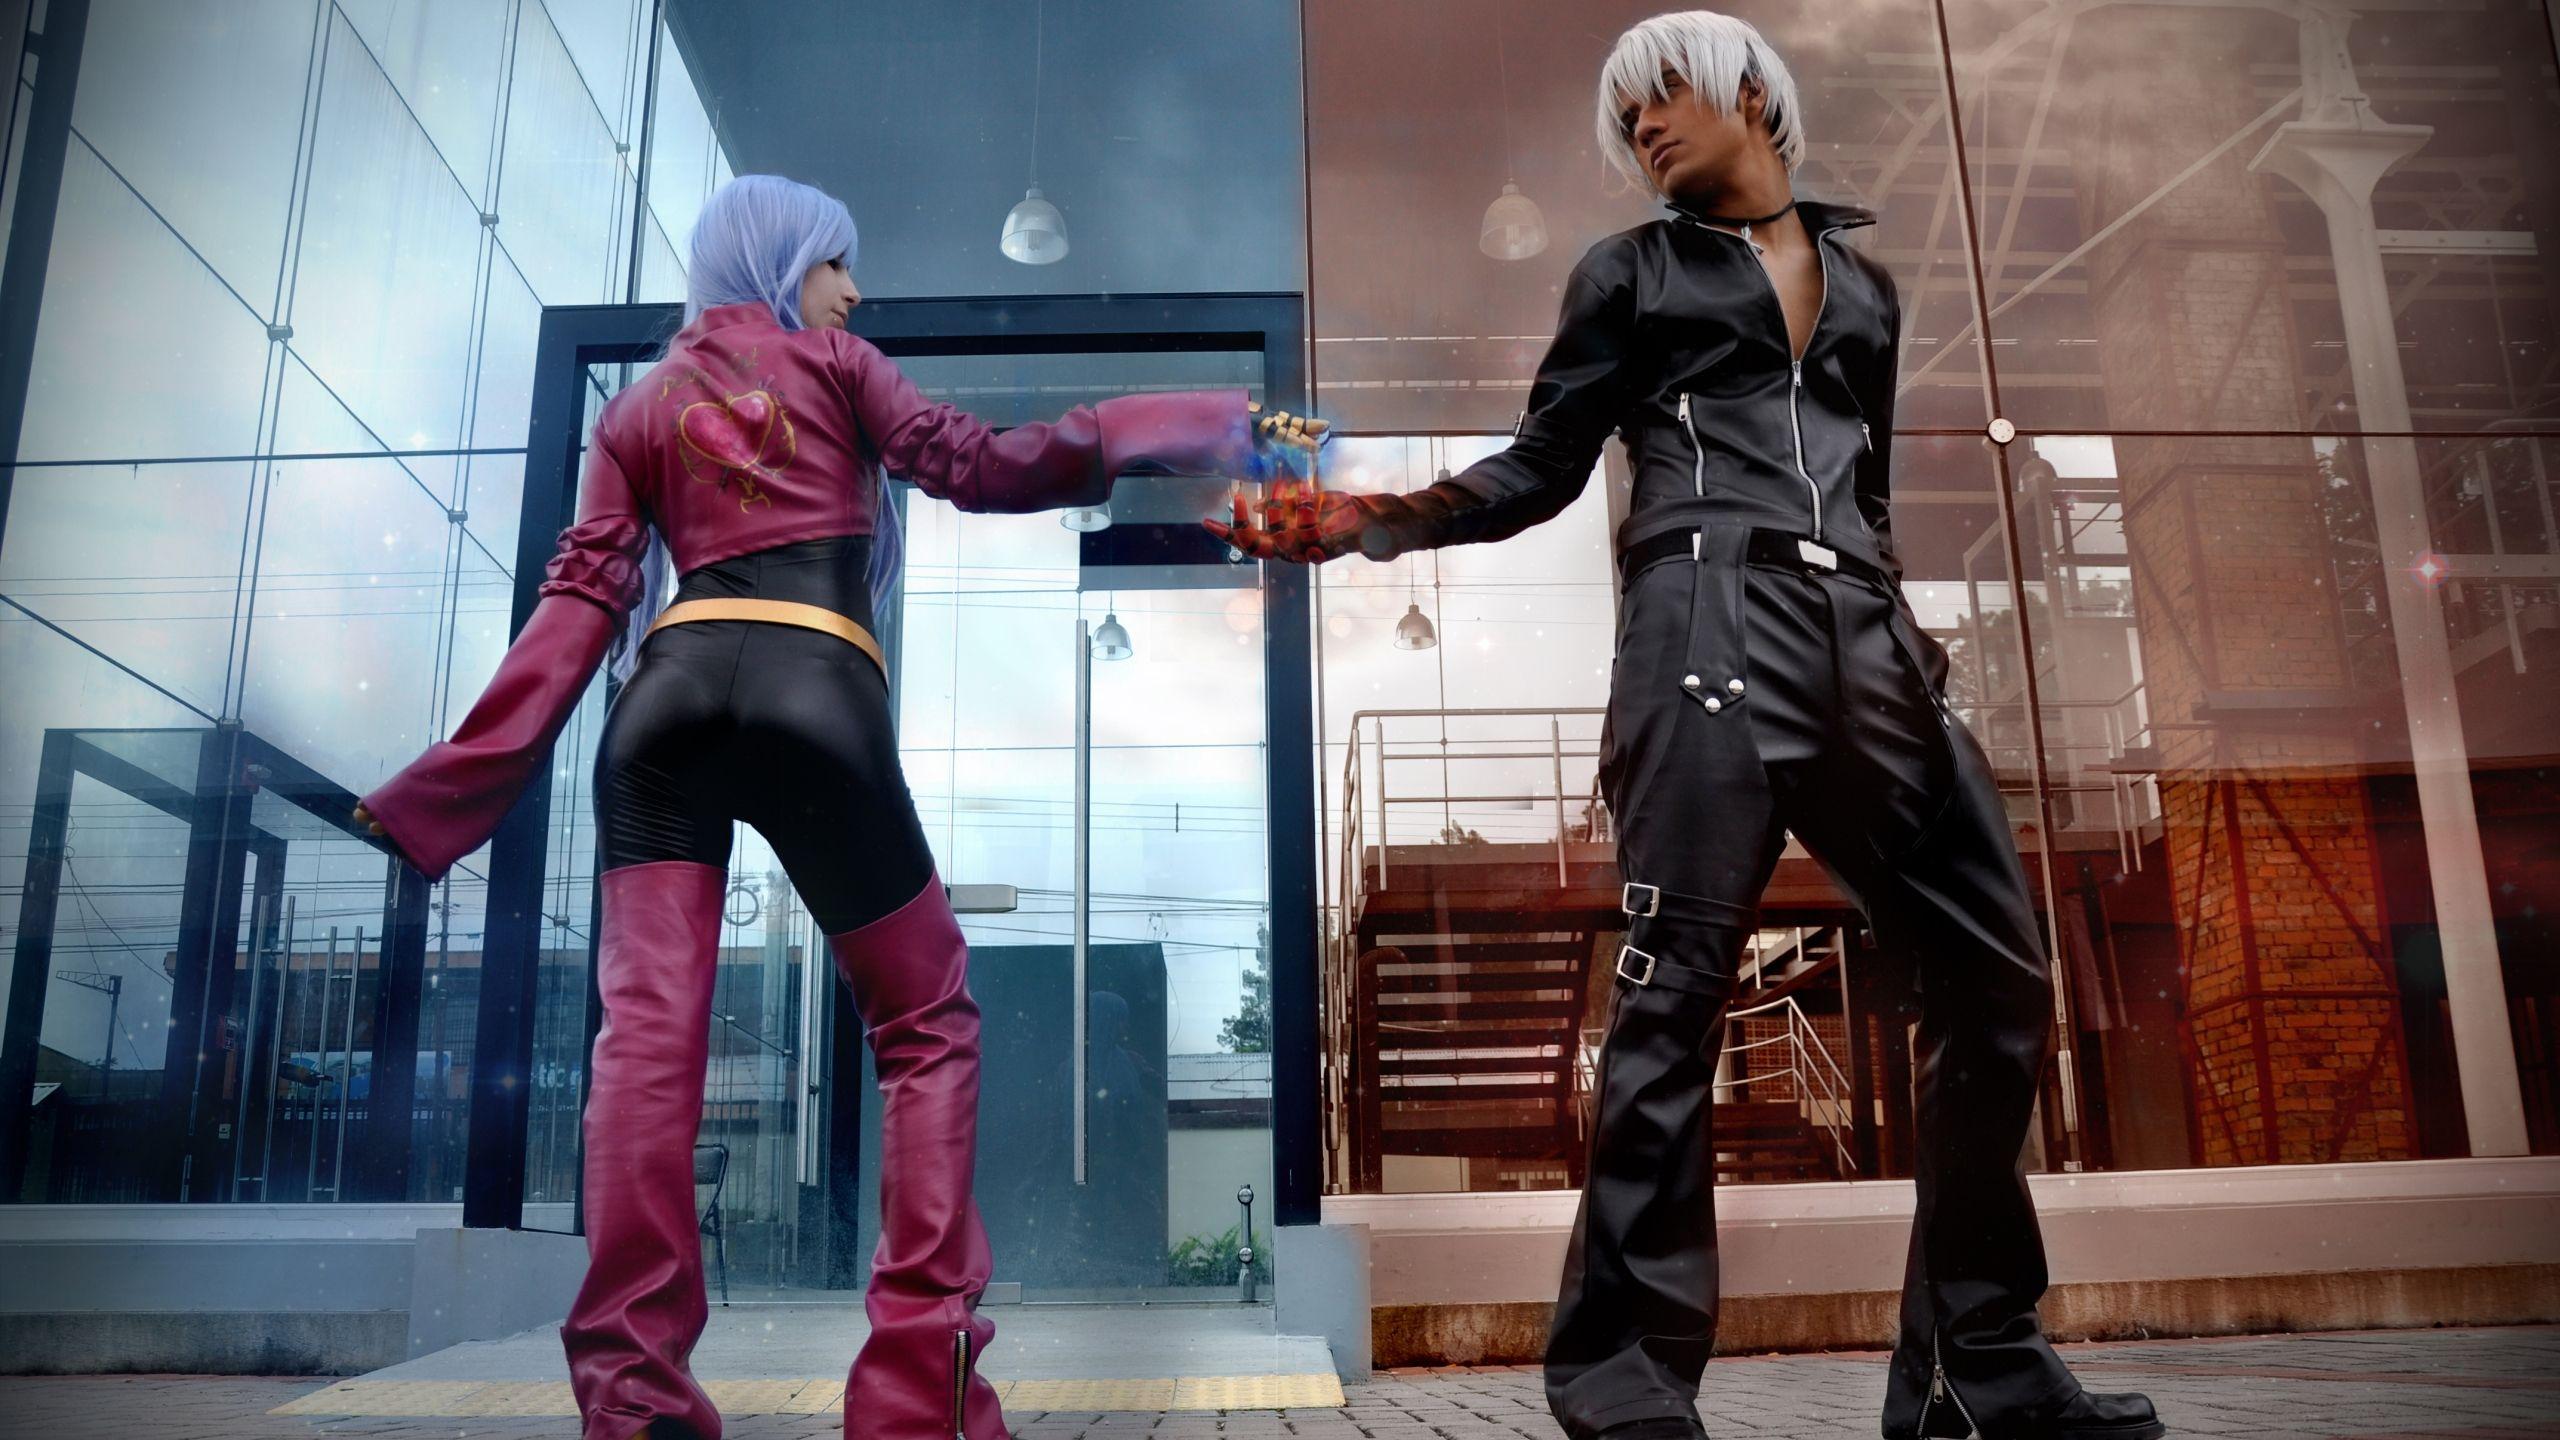 Kula Diamond & K cosplay from King of Fighters